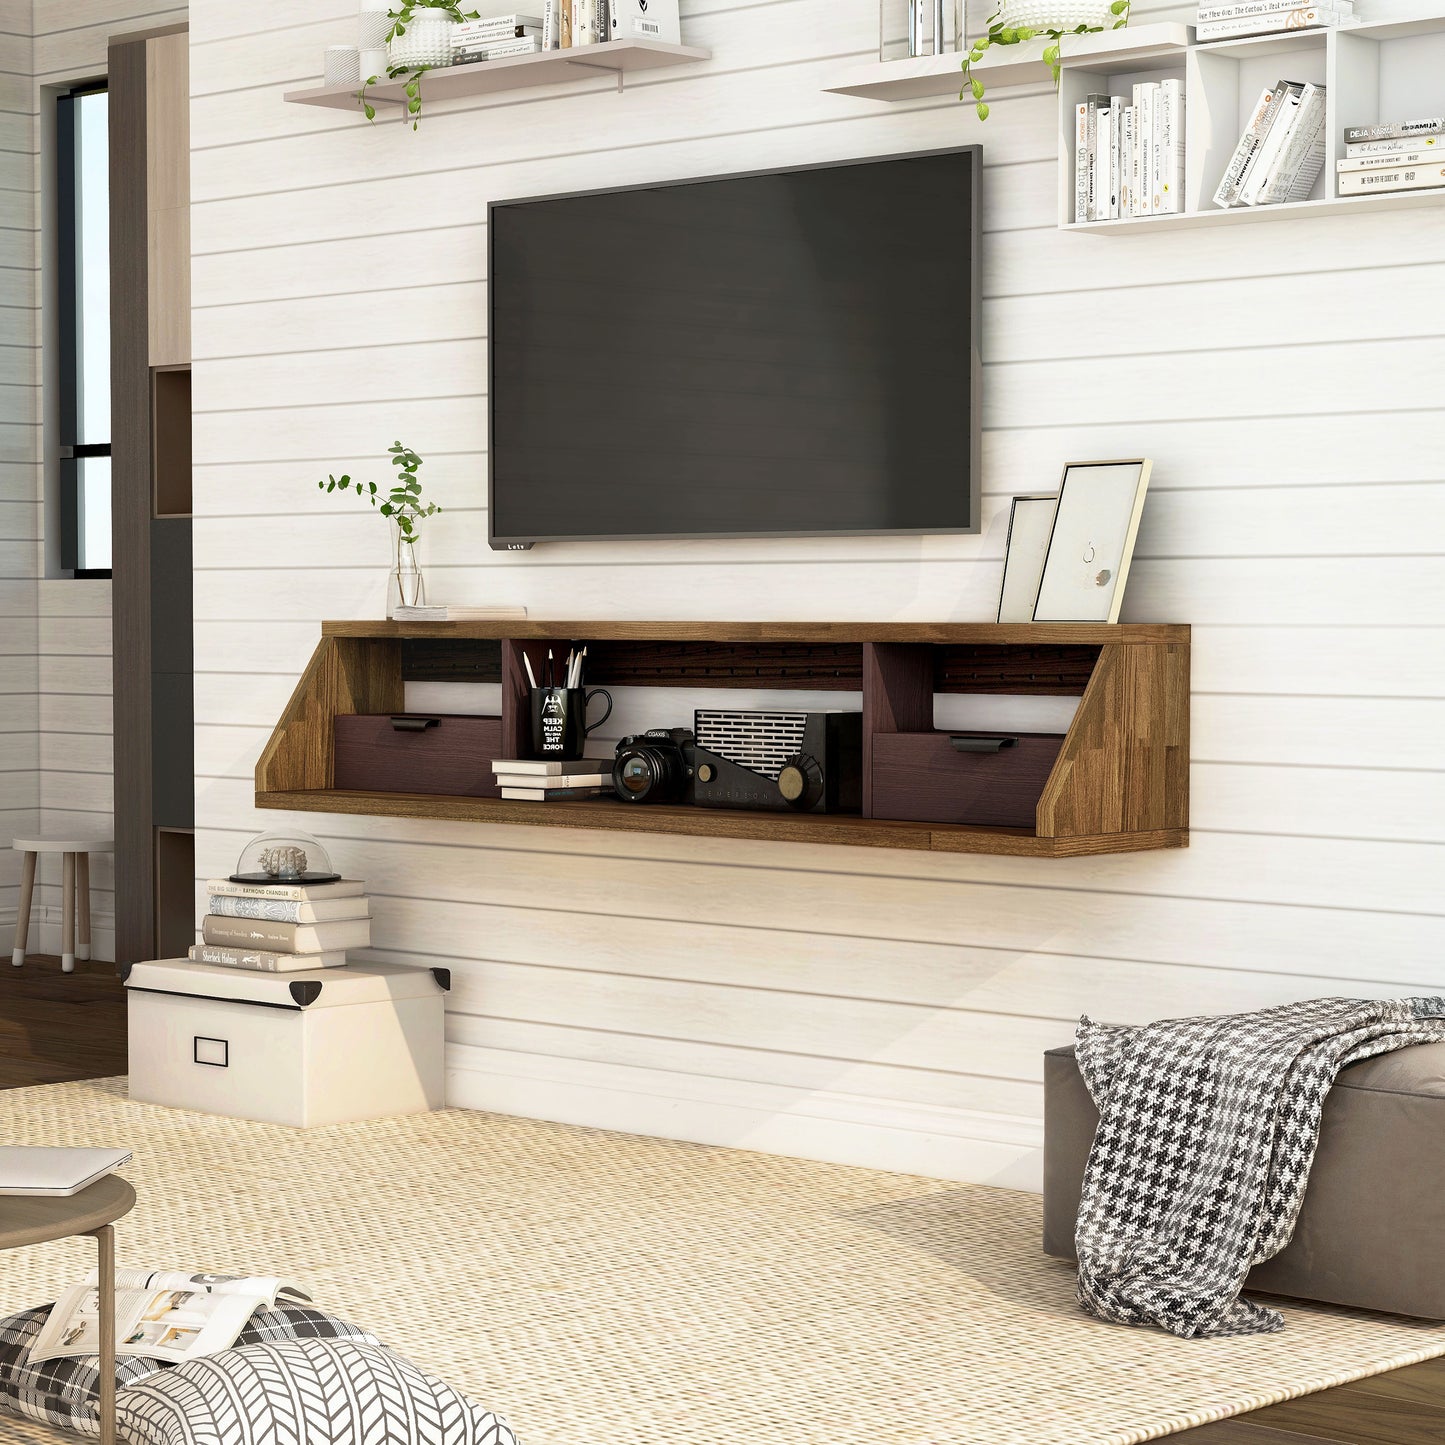 Left angled modern light hickory and wine multi-shelf floating TV console in a living room with accessories